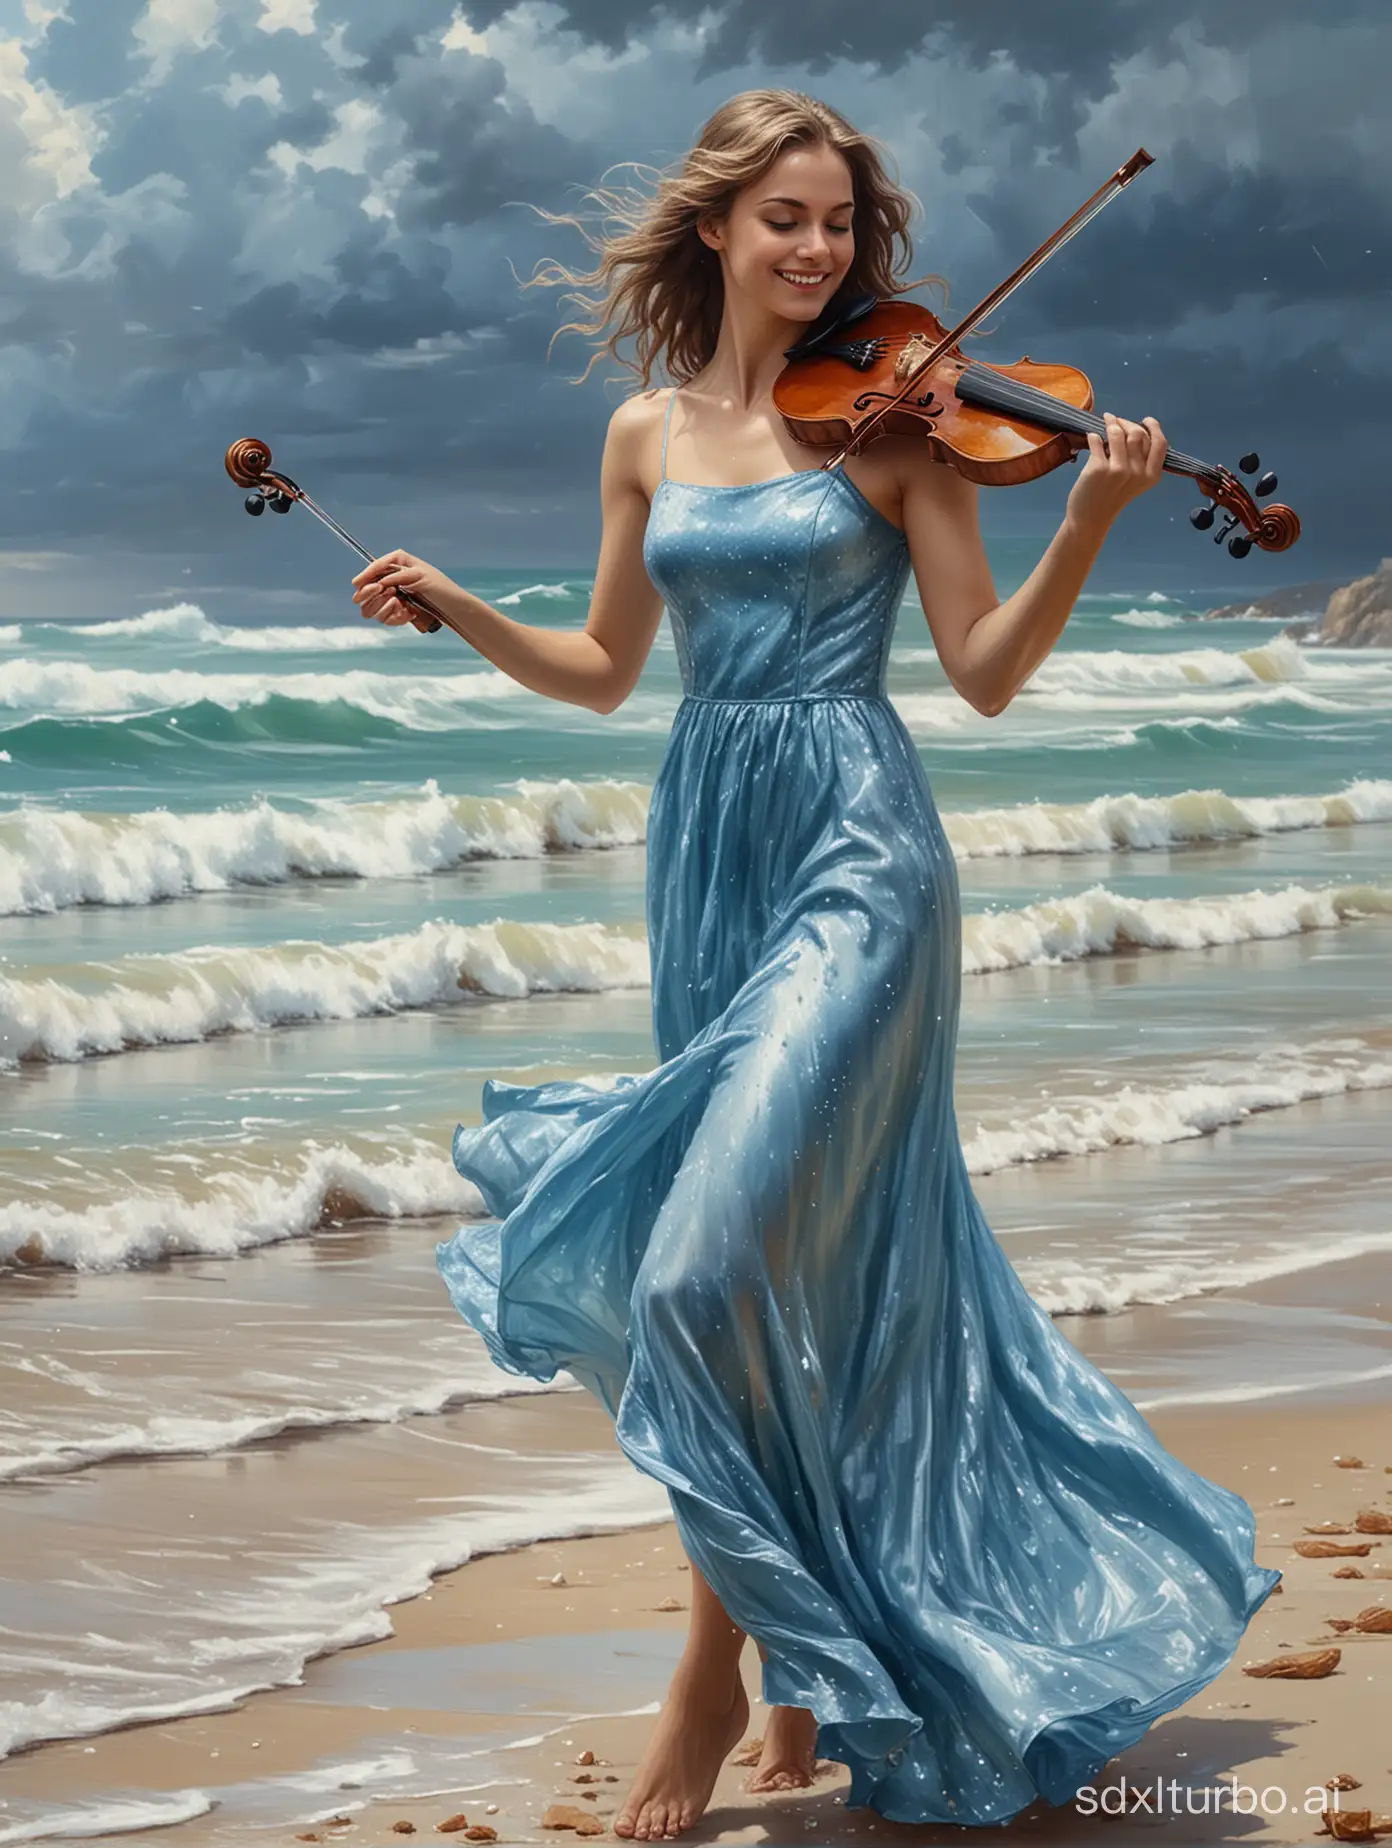 Imagine a 4k oil painting featuring full body beautiful caucasian woman, wearing a shimmery blue dress, sparkling, smiling beautifully, playing the violin, on the beach, cloudy atmosphere  Note   *